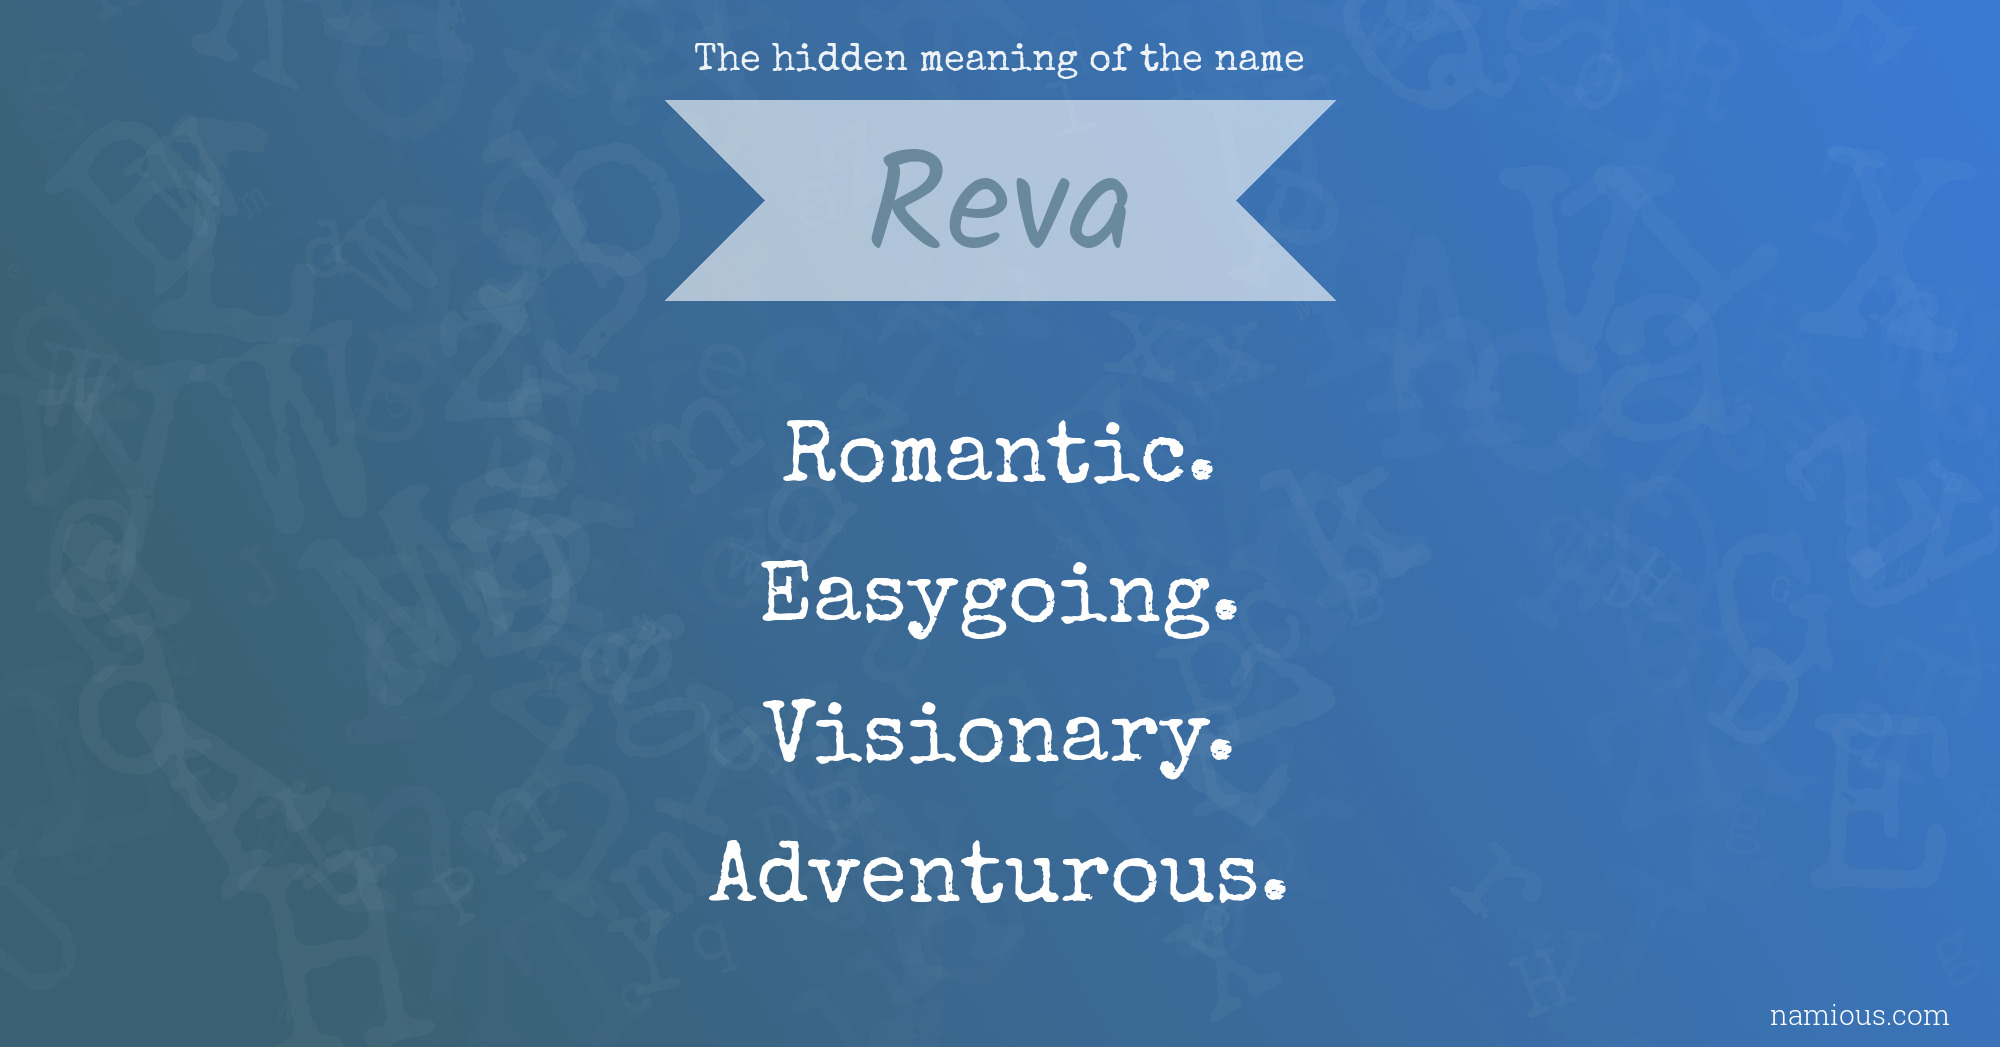 The hidden meaning of the name Reva